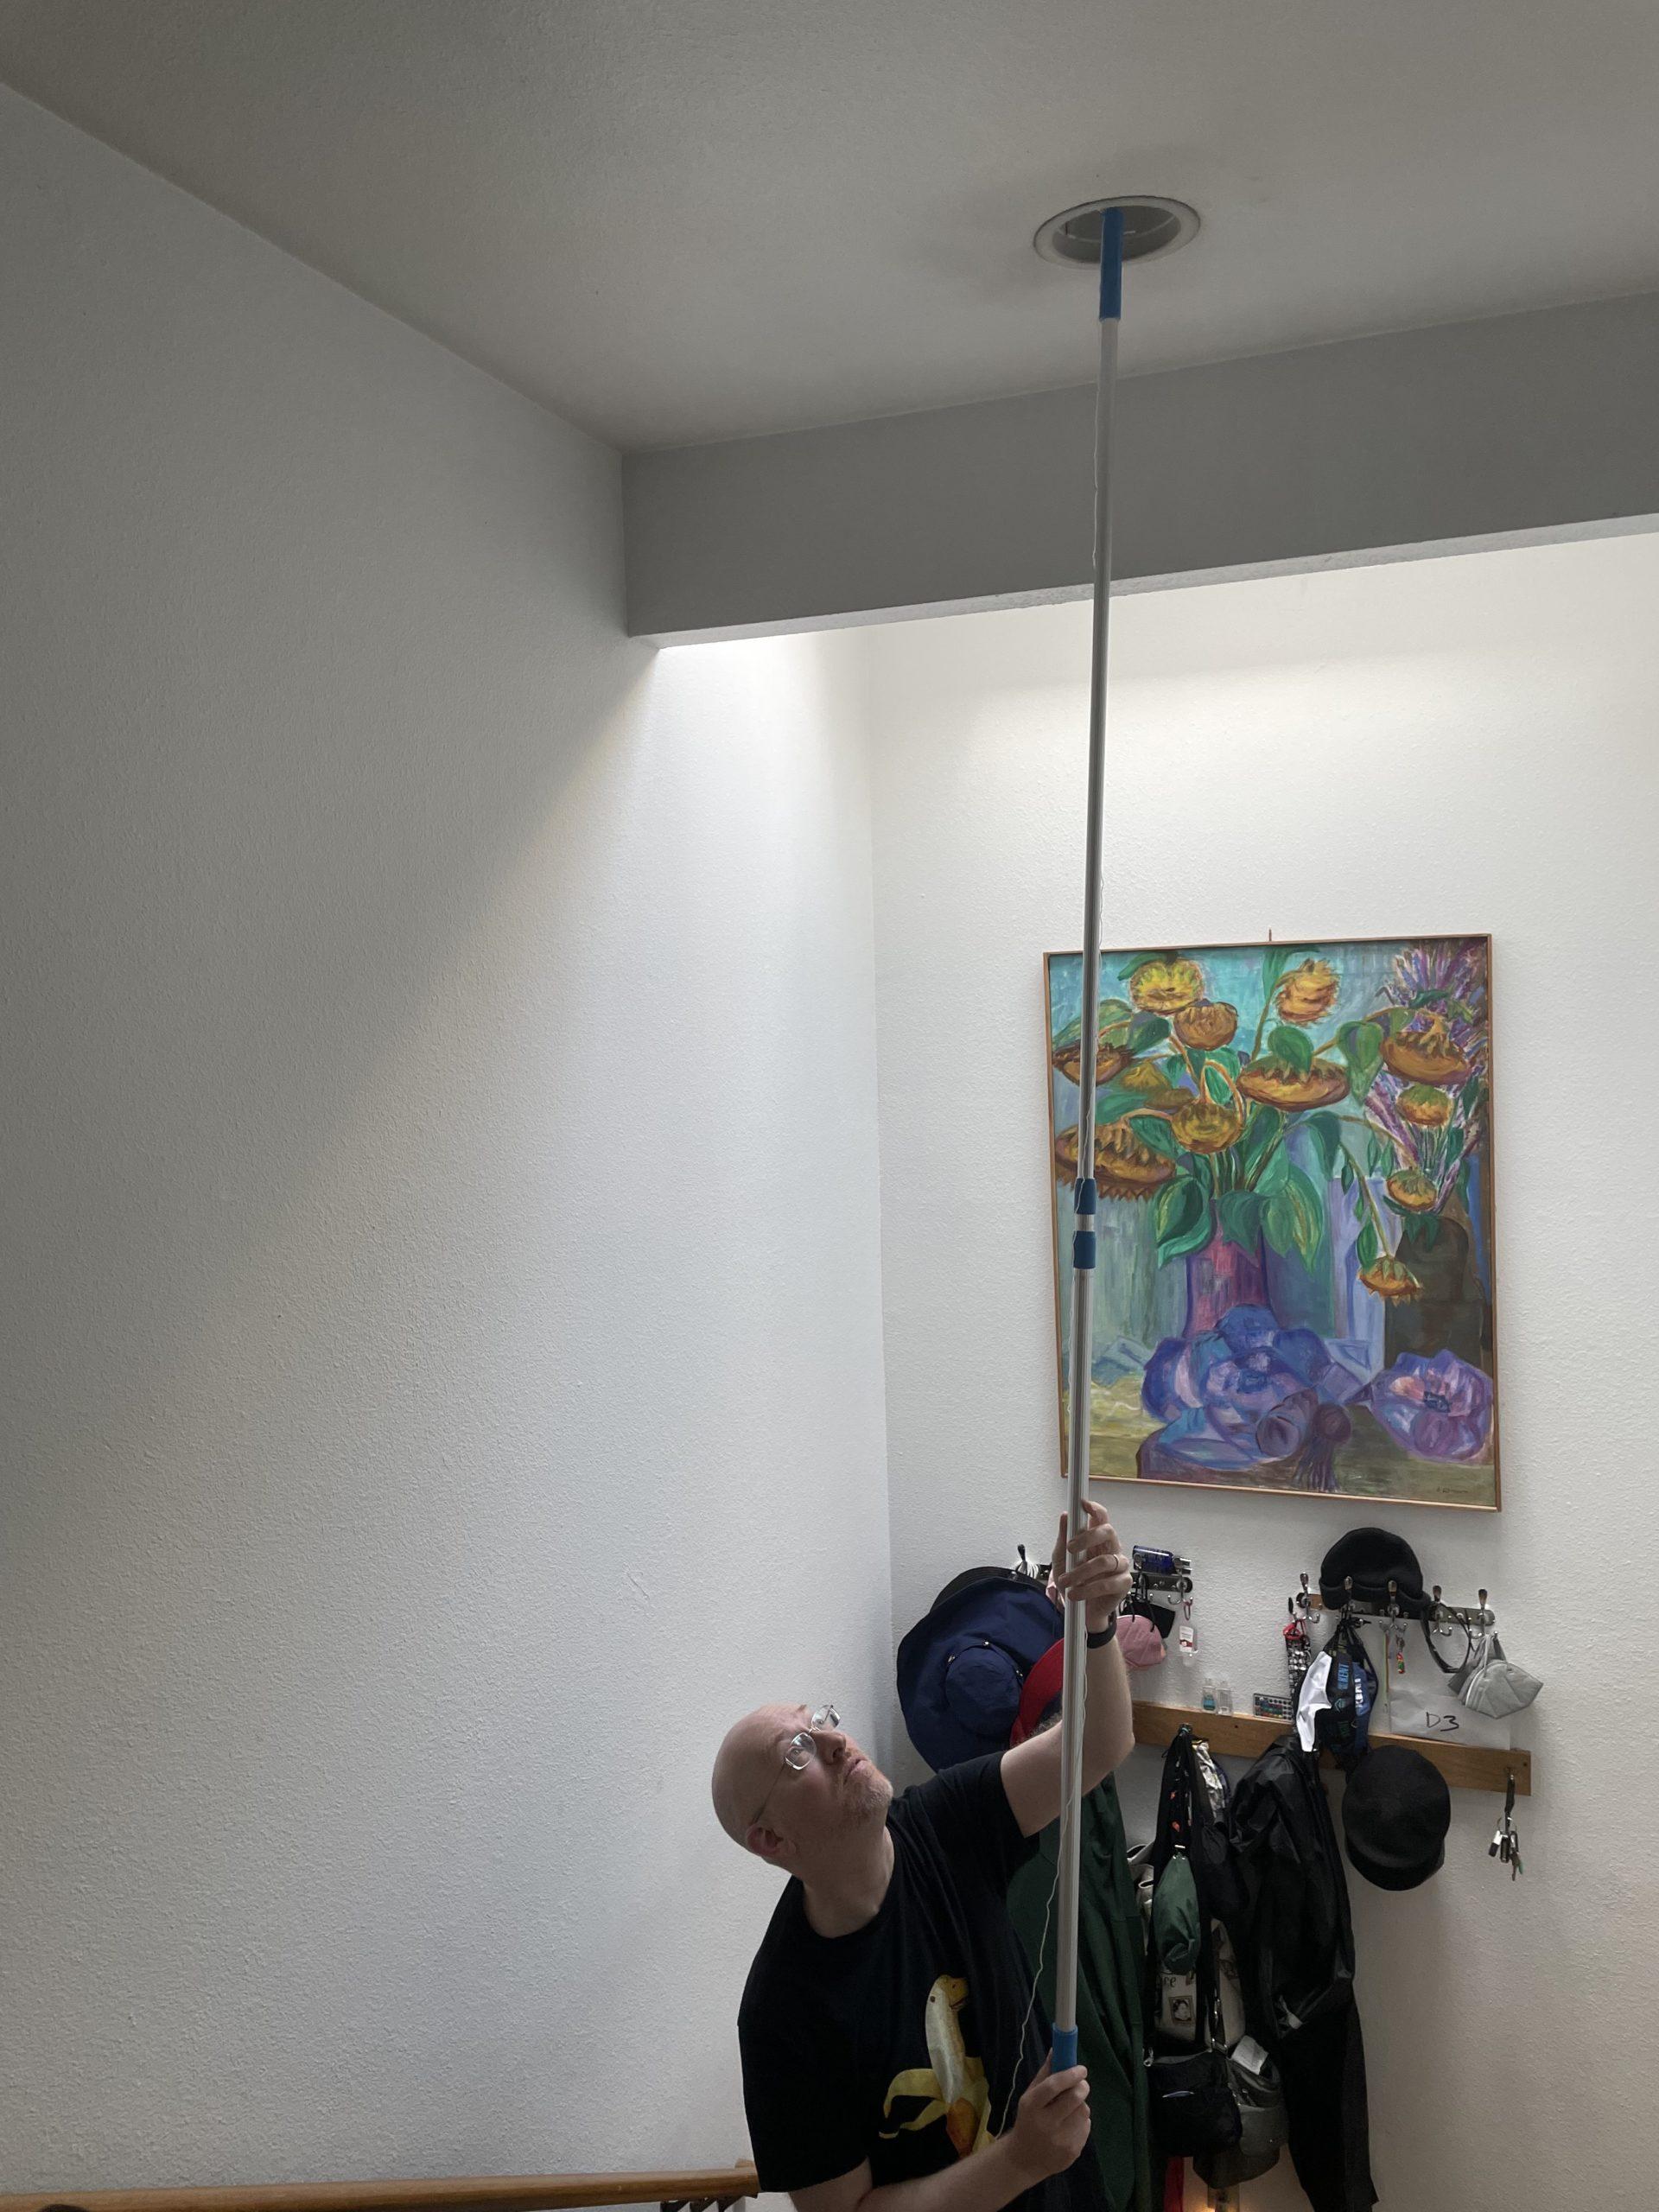 Me standing in an entryway with a high ceiling, using an extension pole to replace a ceiling-mounted lightbulb.